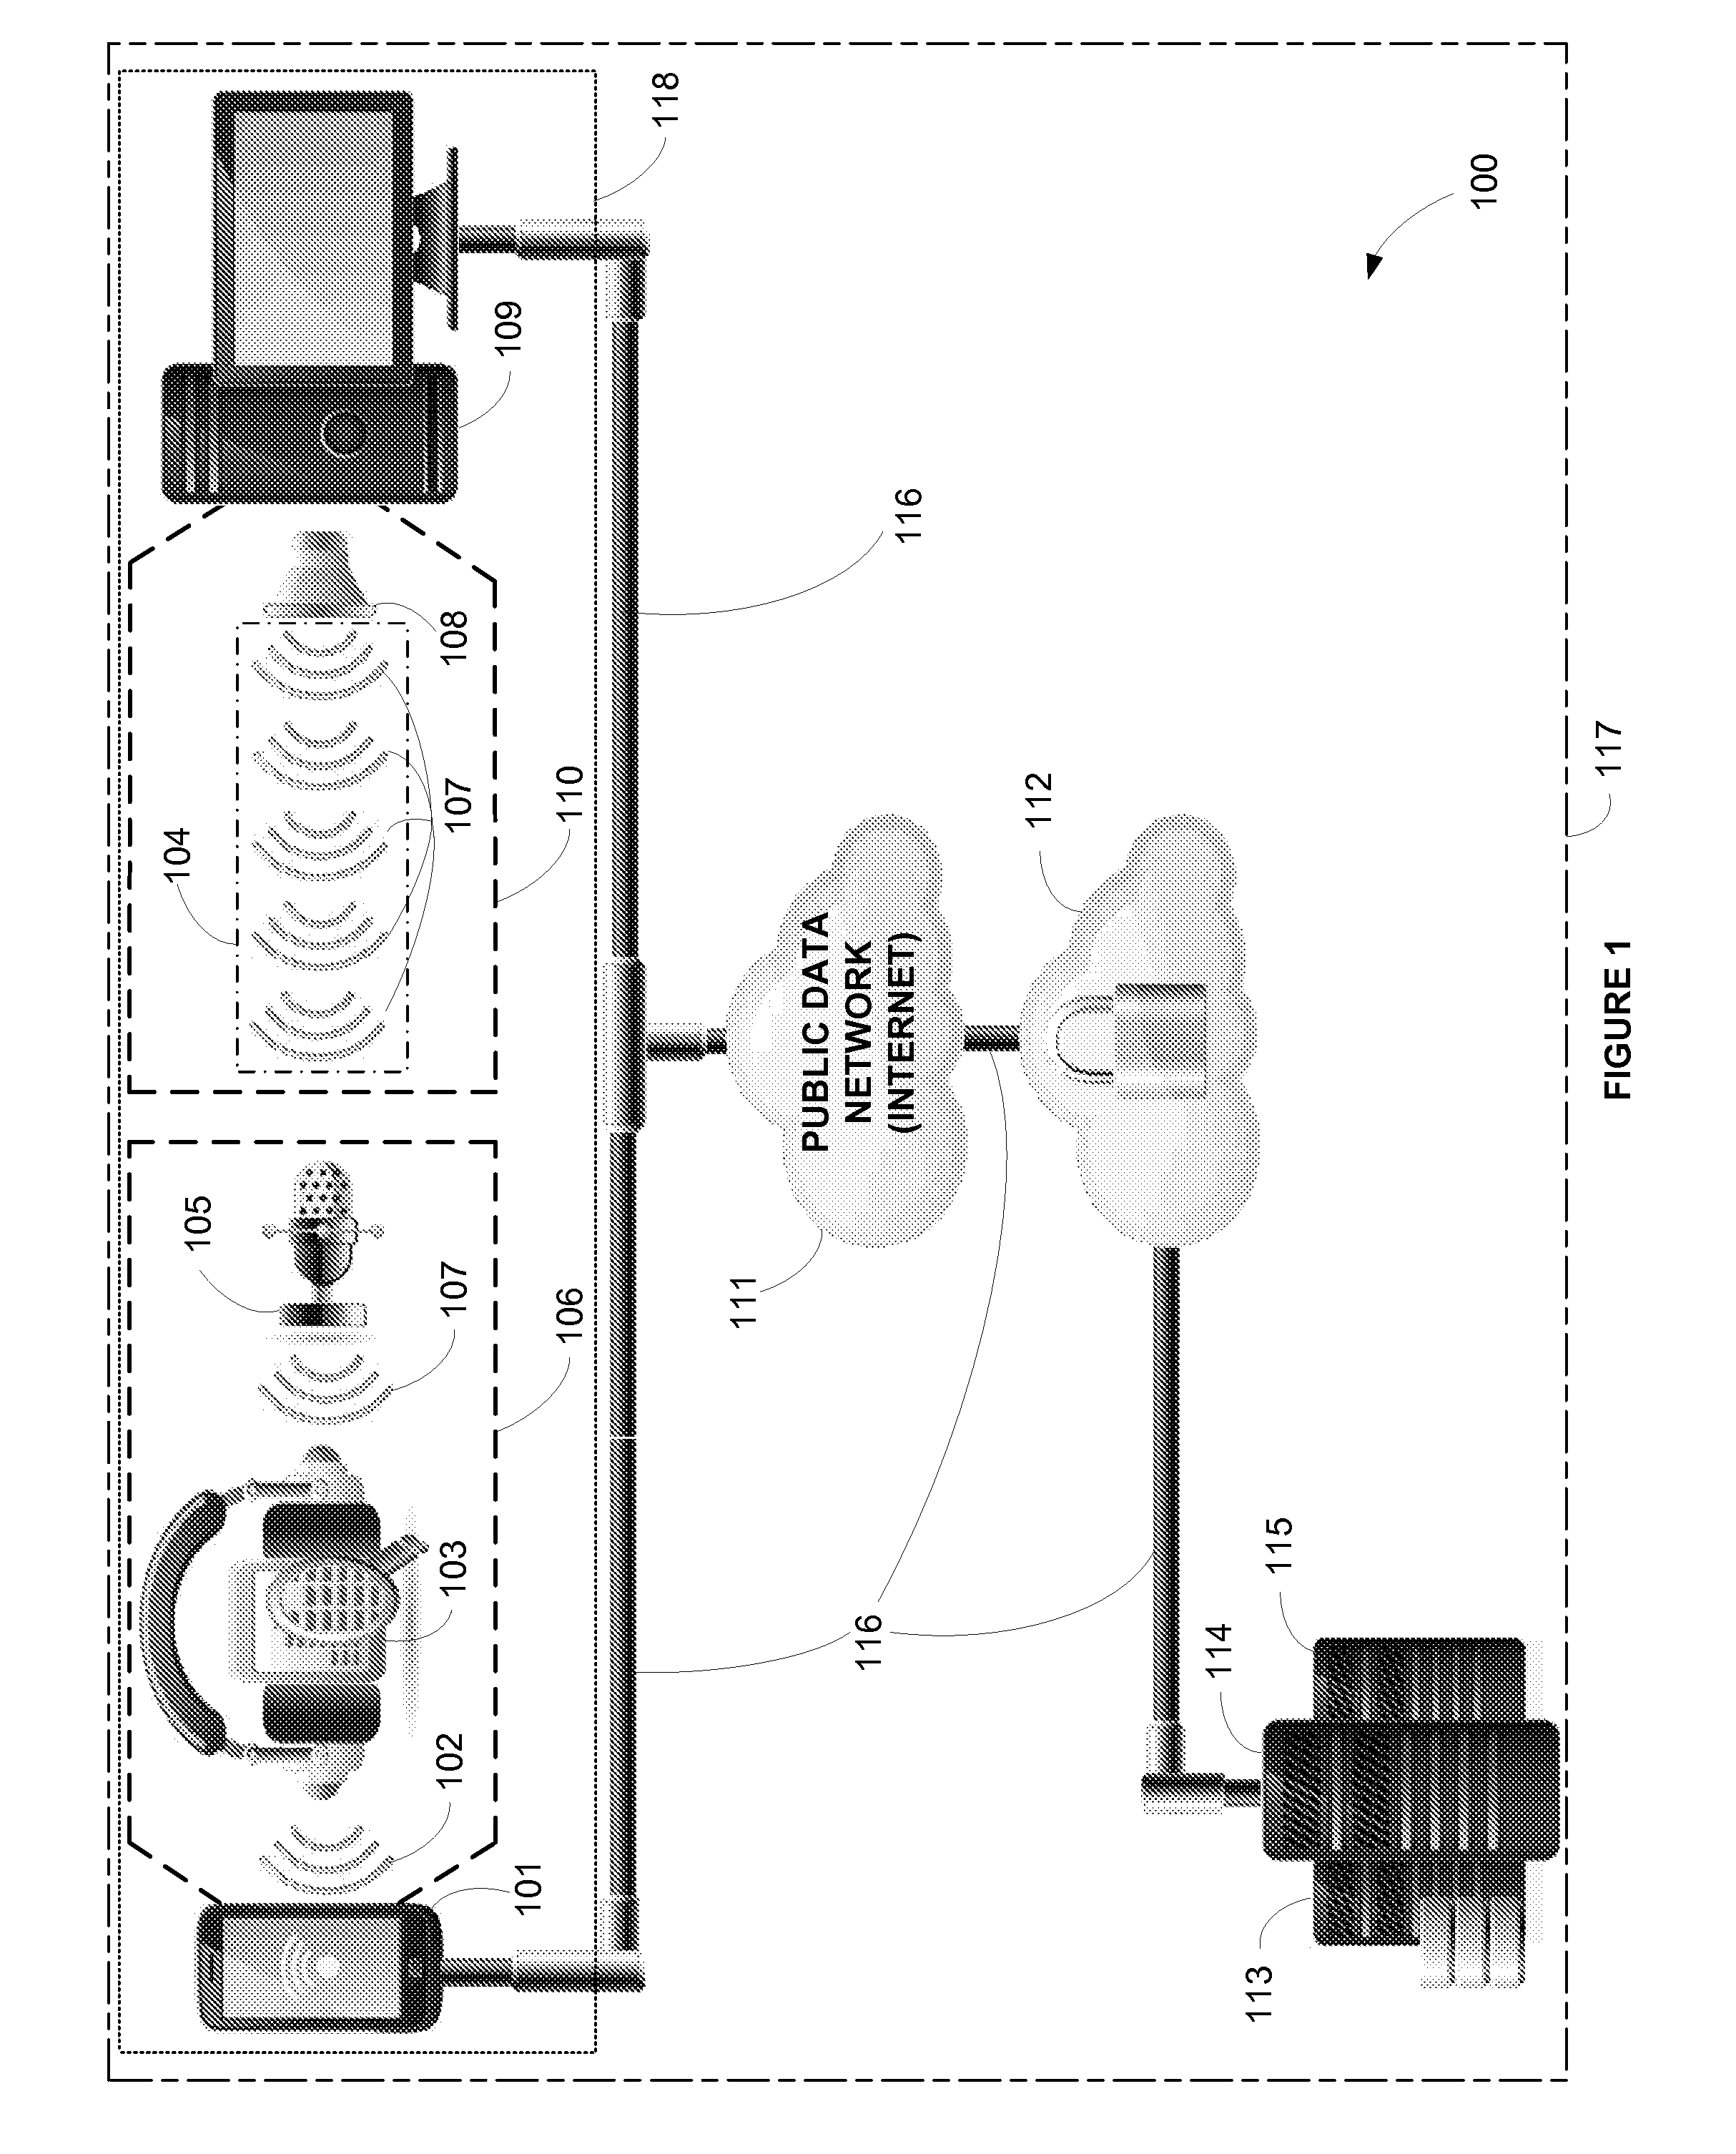 System and Method for Wirelessly Transmitting and Receiving Customized Data Broadcasts